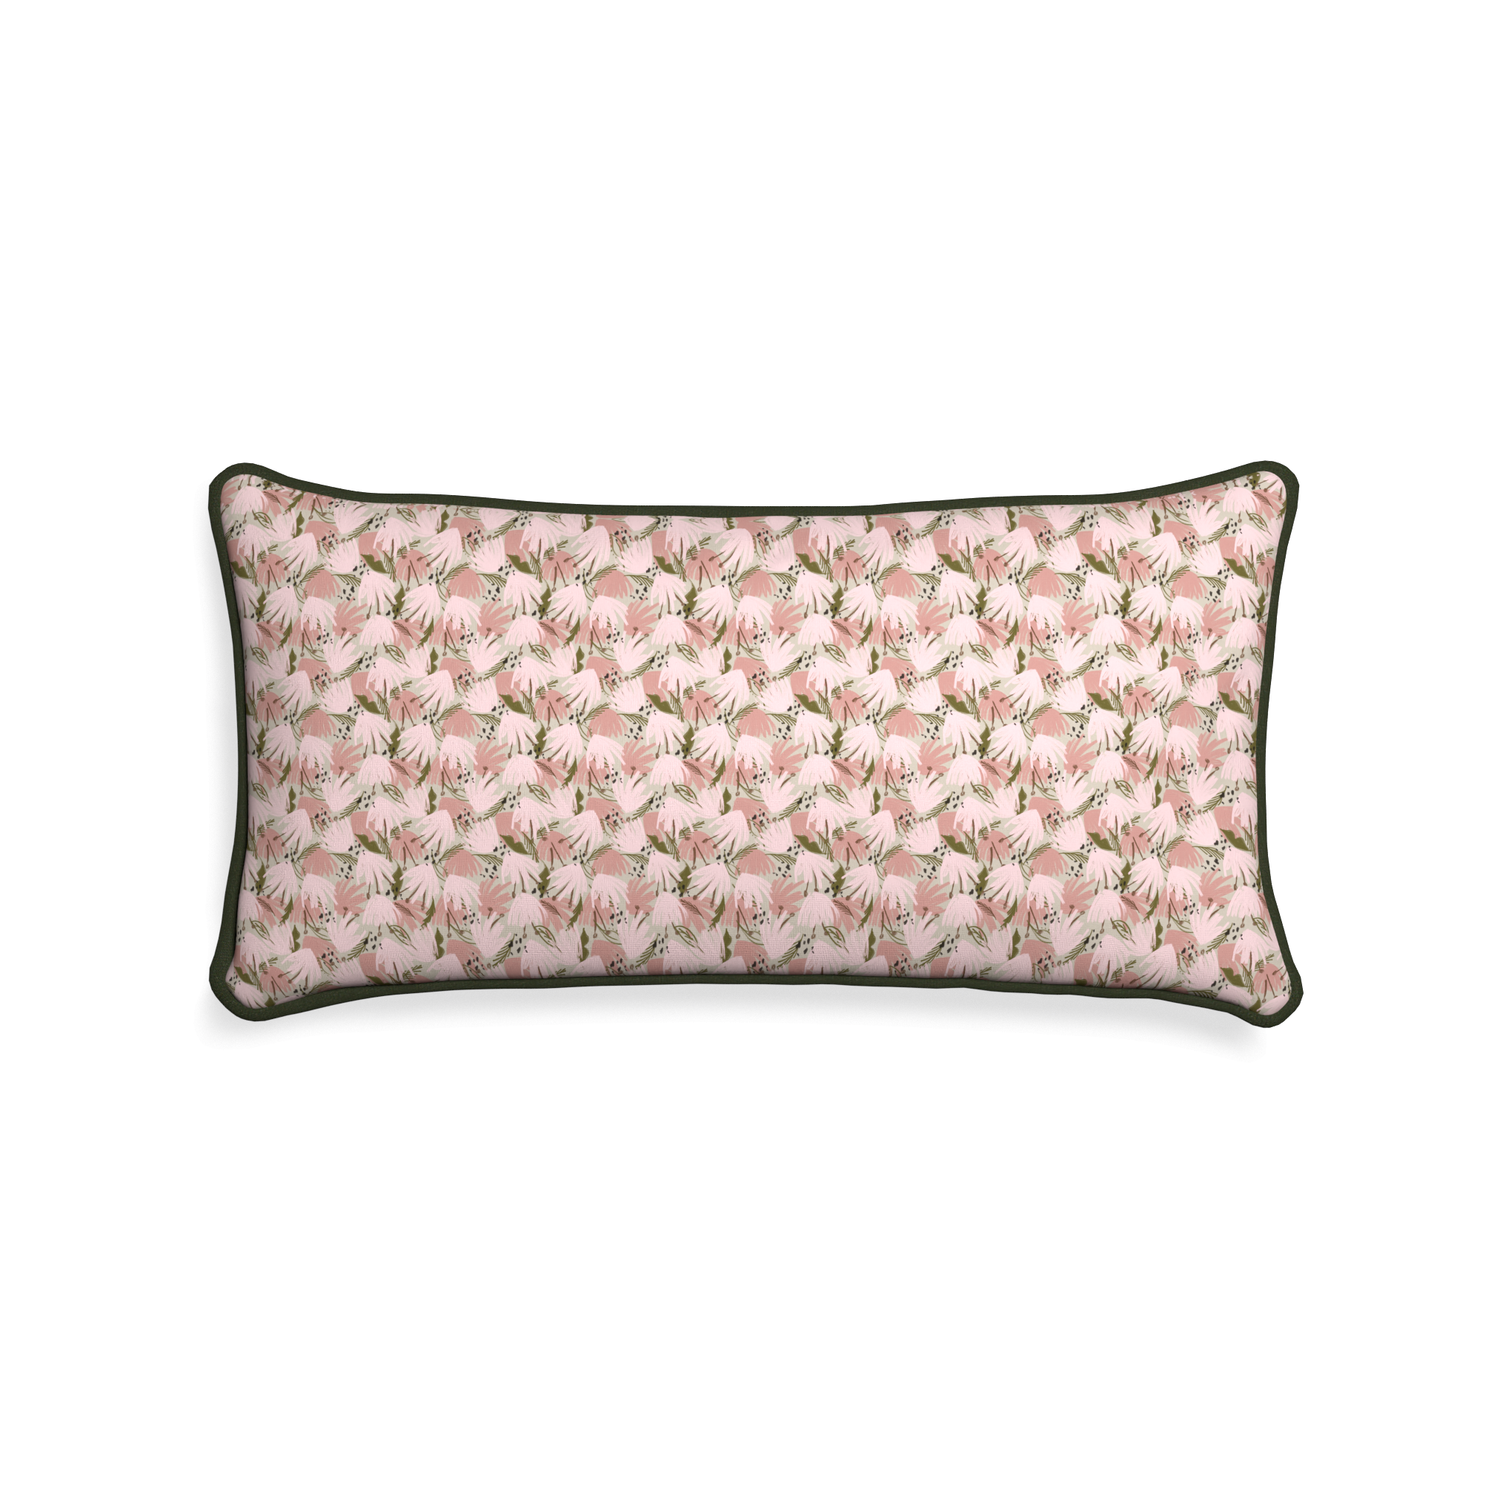 Midi-lumbar eden pink custom pink floralpillow with f piping on white background